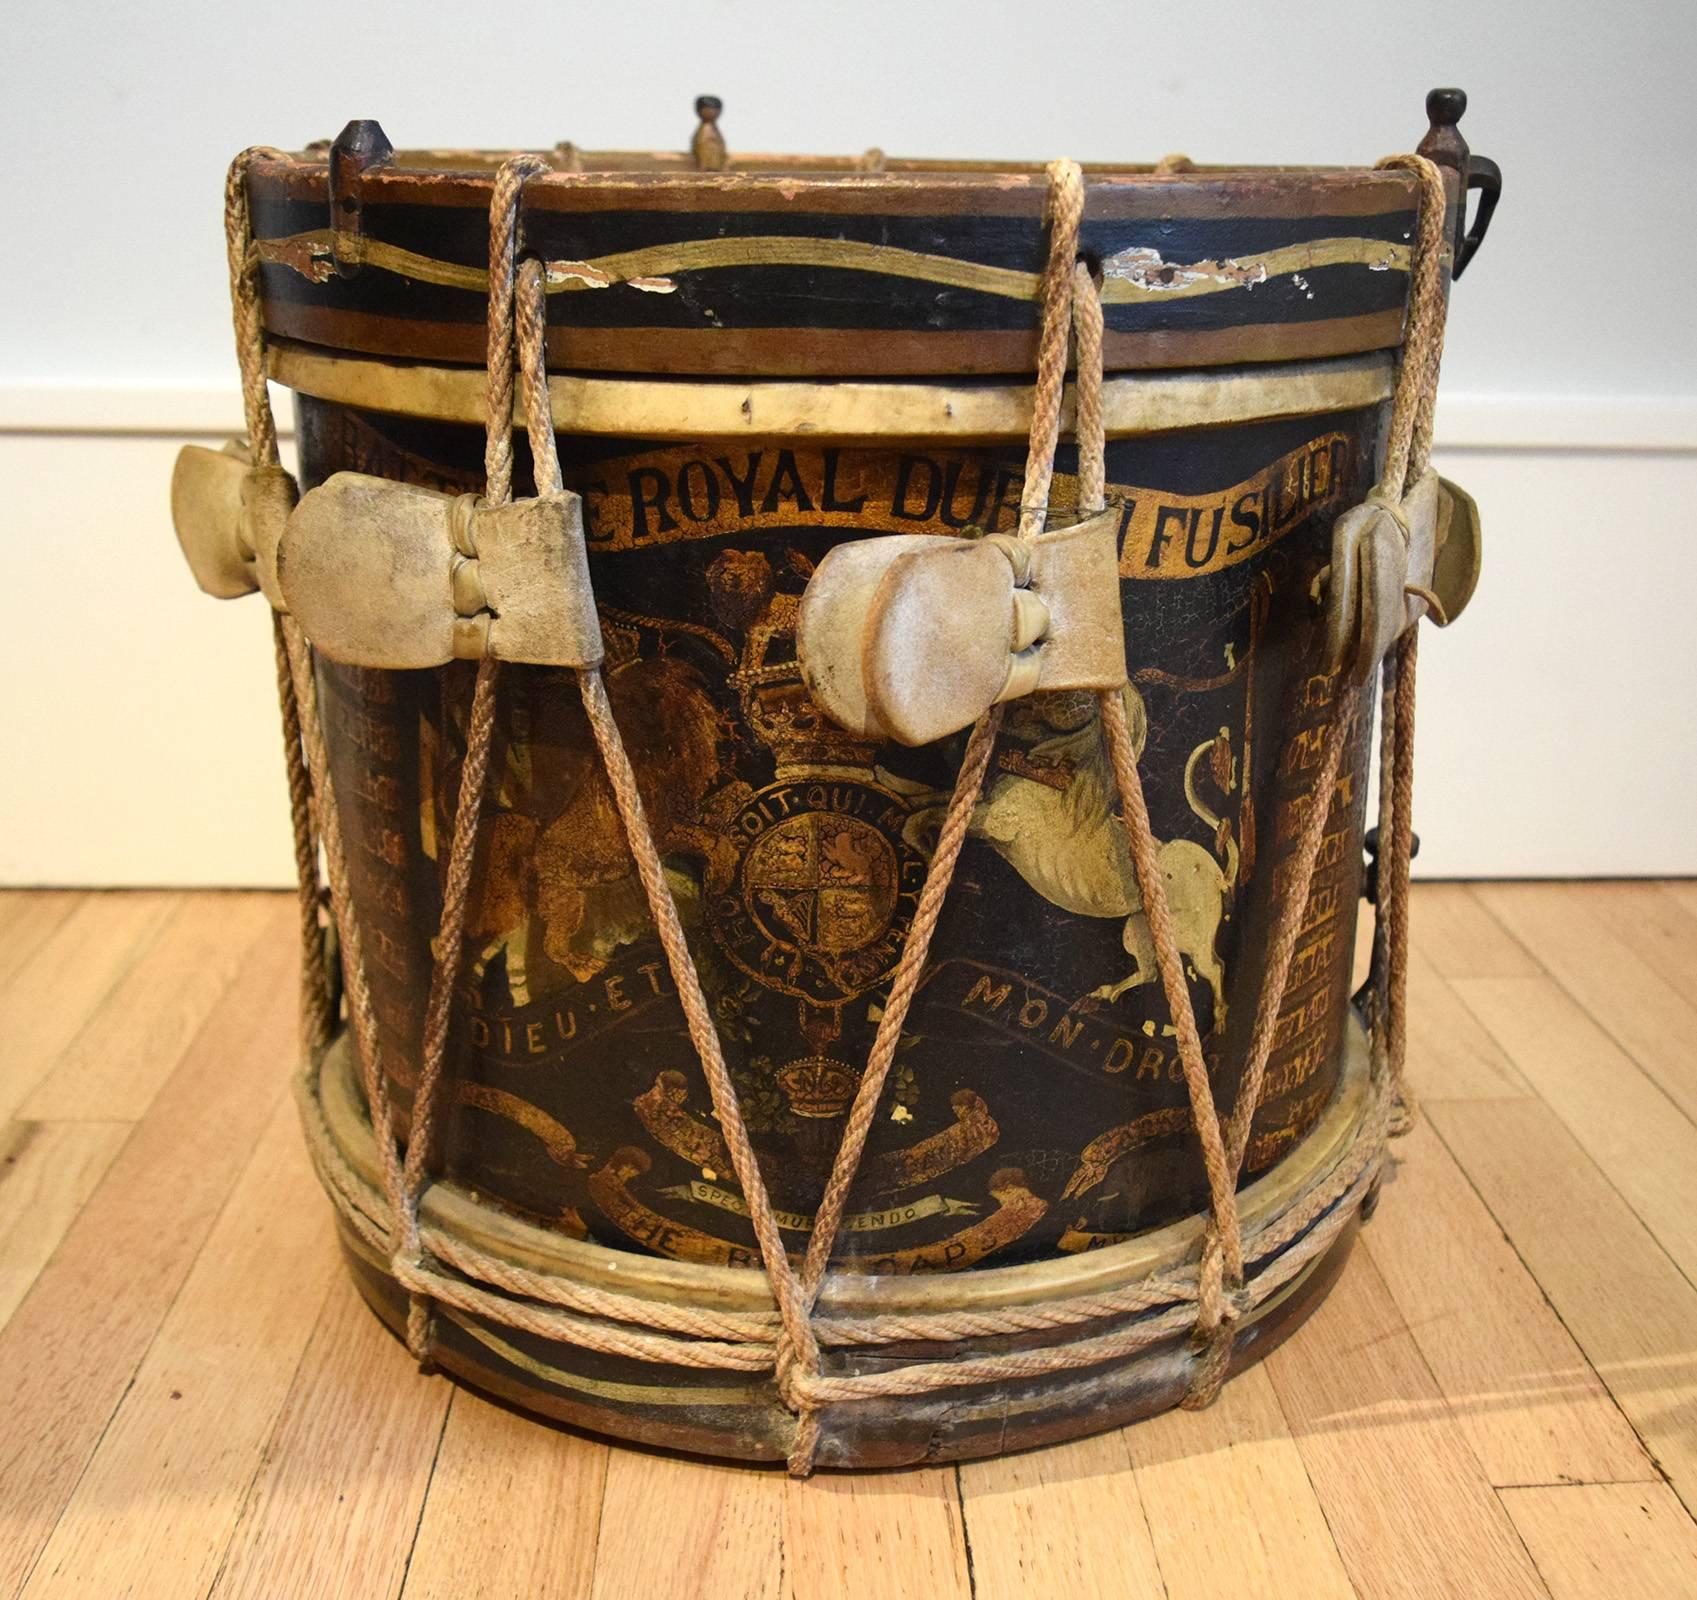 This charming 19th-century English regimental drum was fitted with a glass top to serve as a table. It bears the painted arms of the Royal Dublin Fusiliers that was formed in 1881, garrisoned in Ireland, served with distinction in India and South